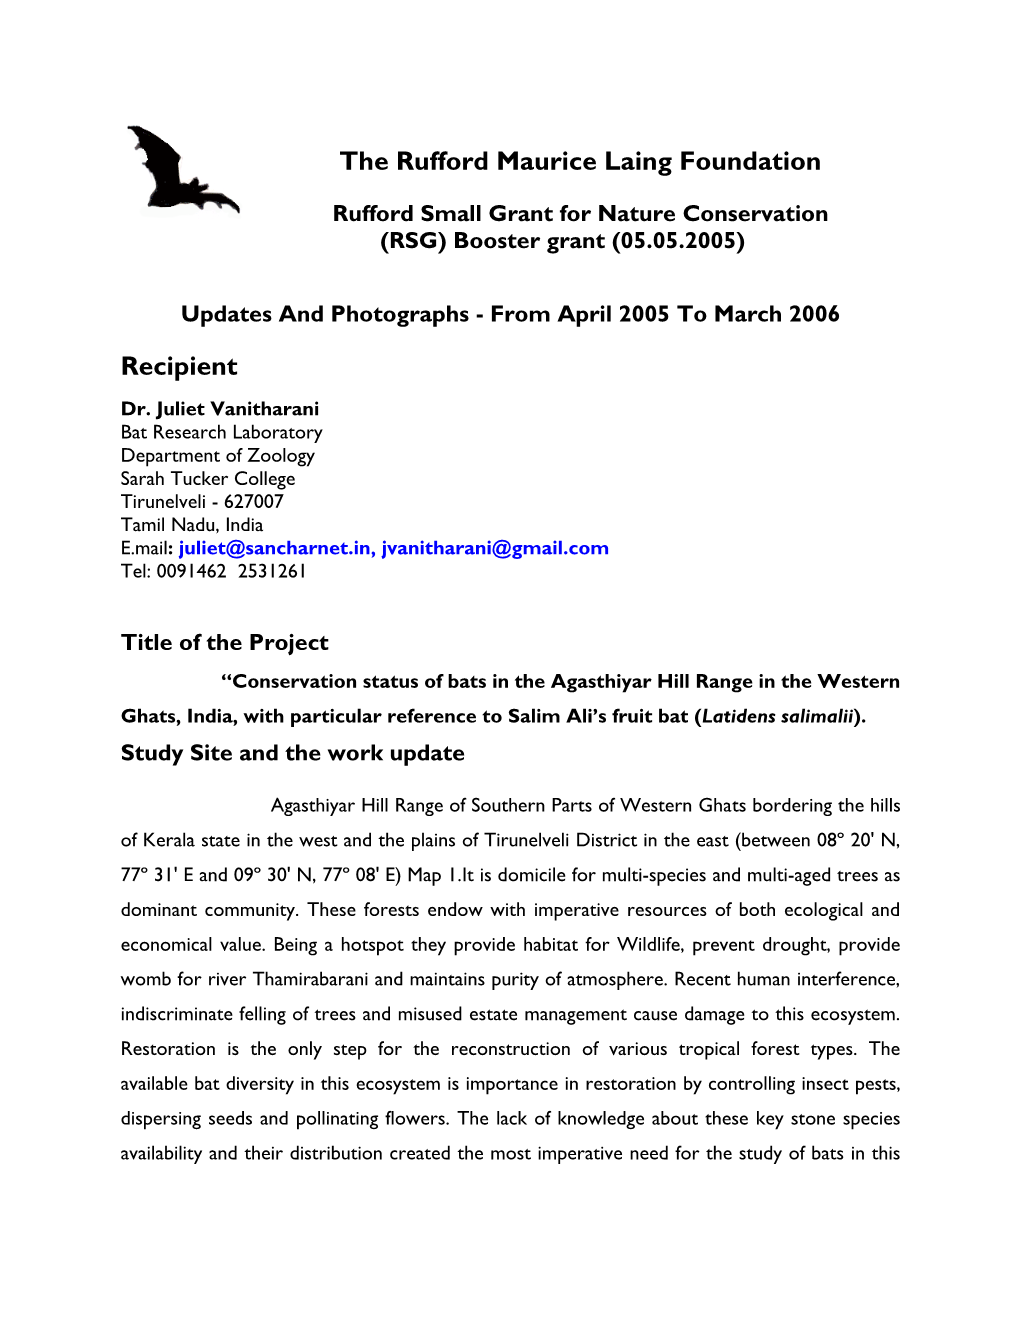 The Rufford Maurice Laing Foundation Recipient